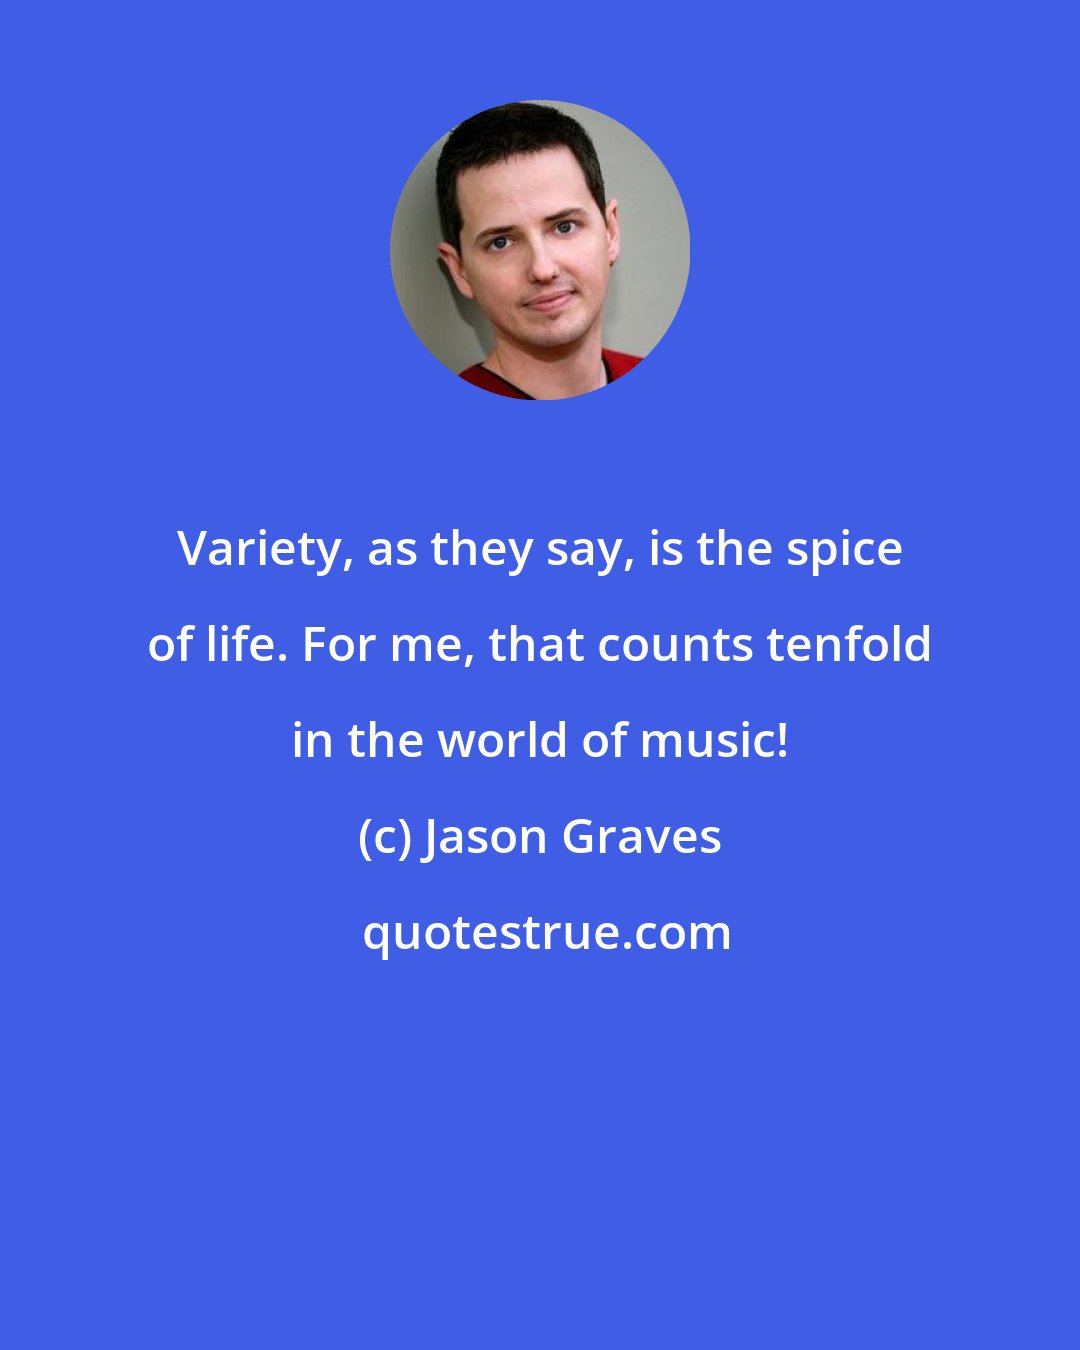 Jason Graves: Variety, as they say, is the spice of life. For me, that counts tenfold in the world of music!